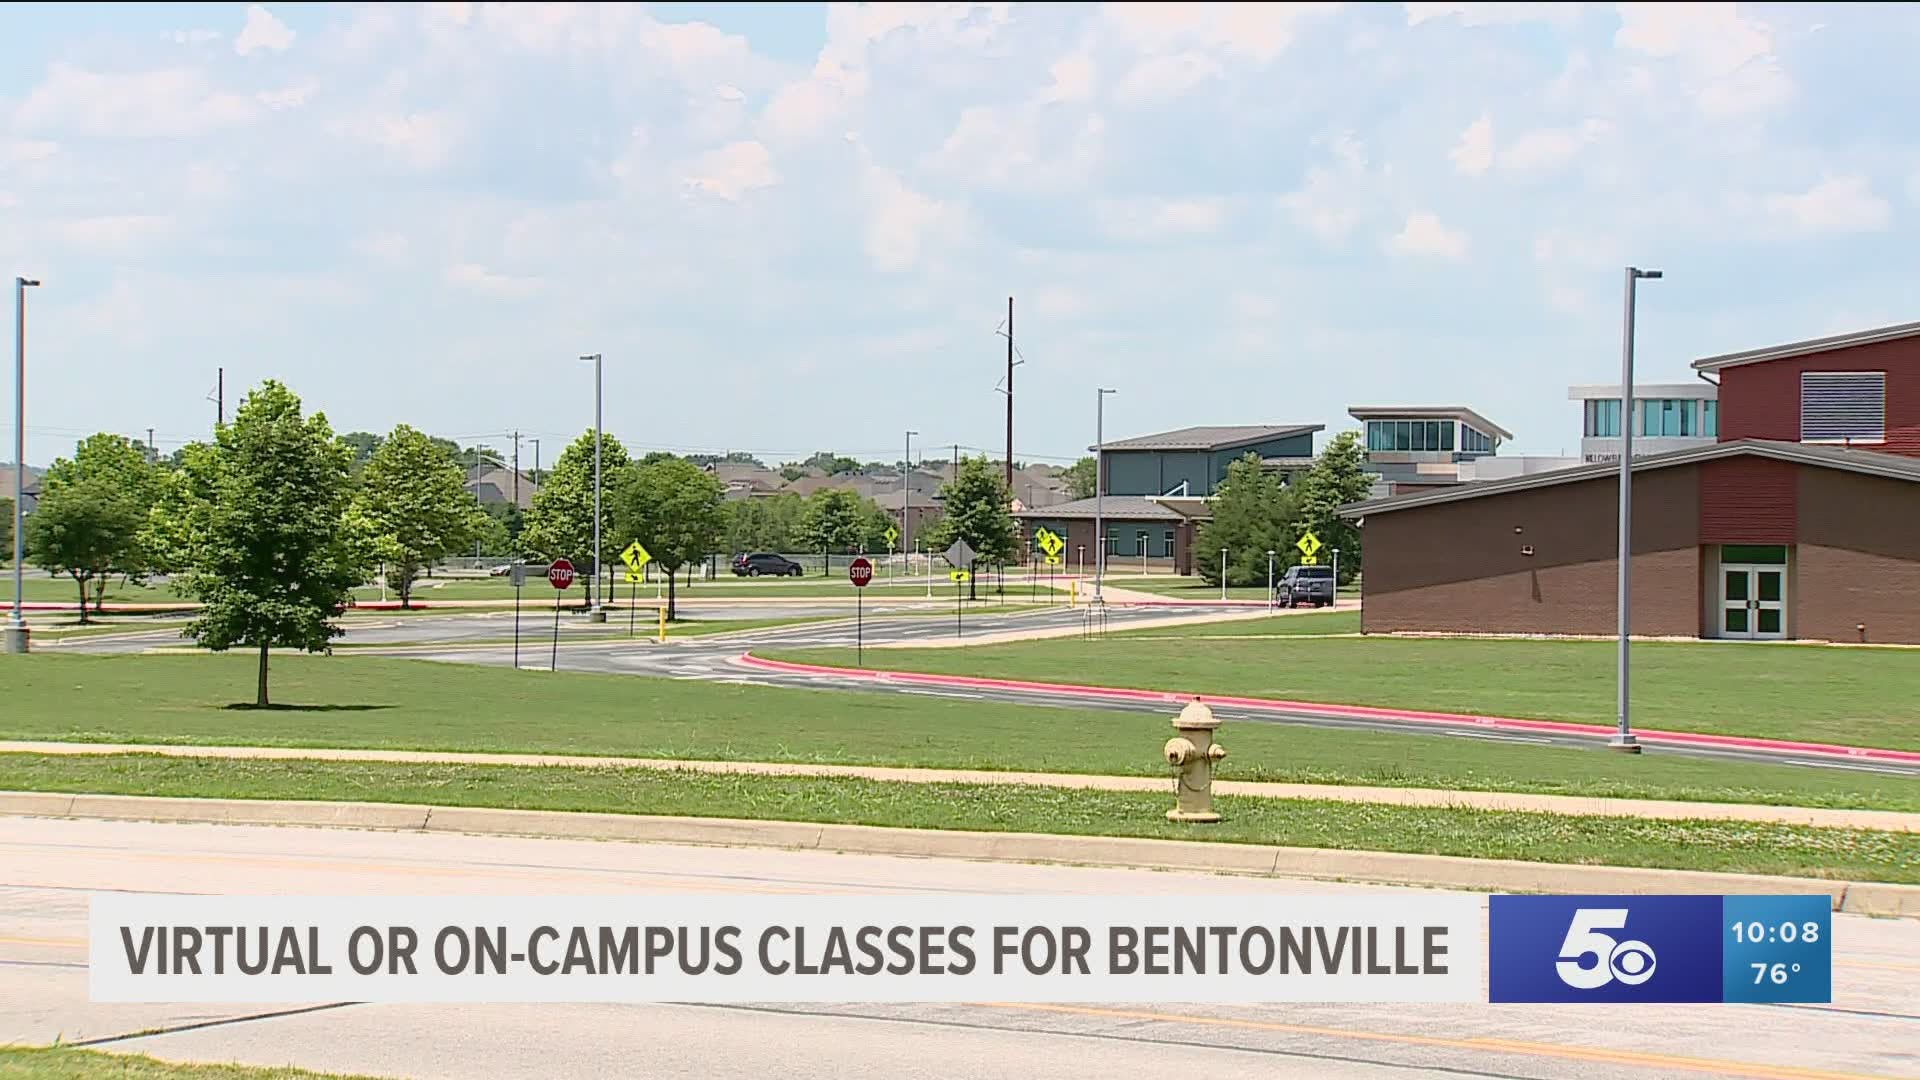 Parents to decide on virtual or in-person classes for Bentonville students